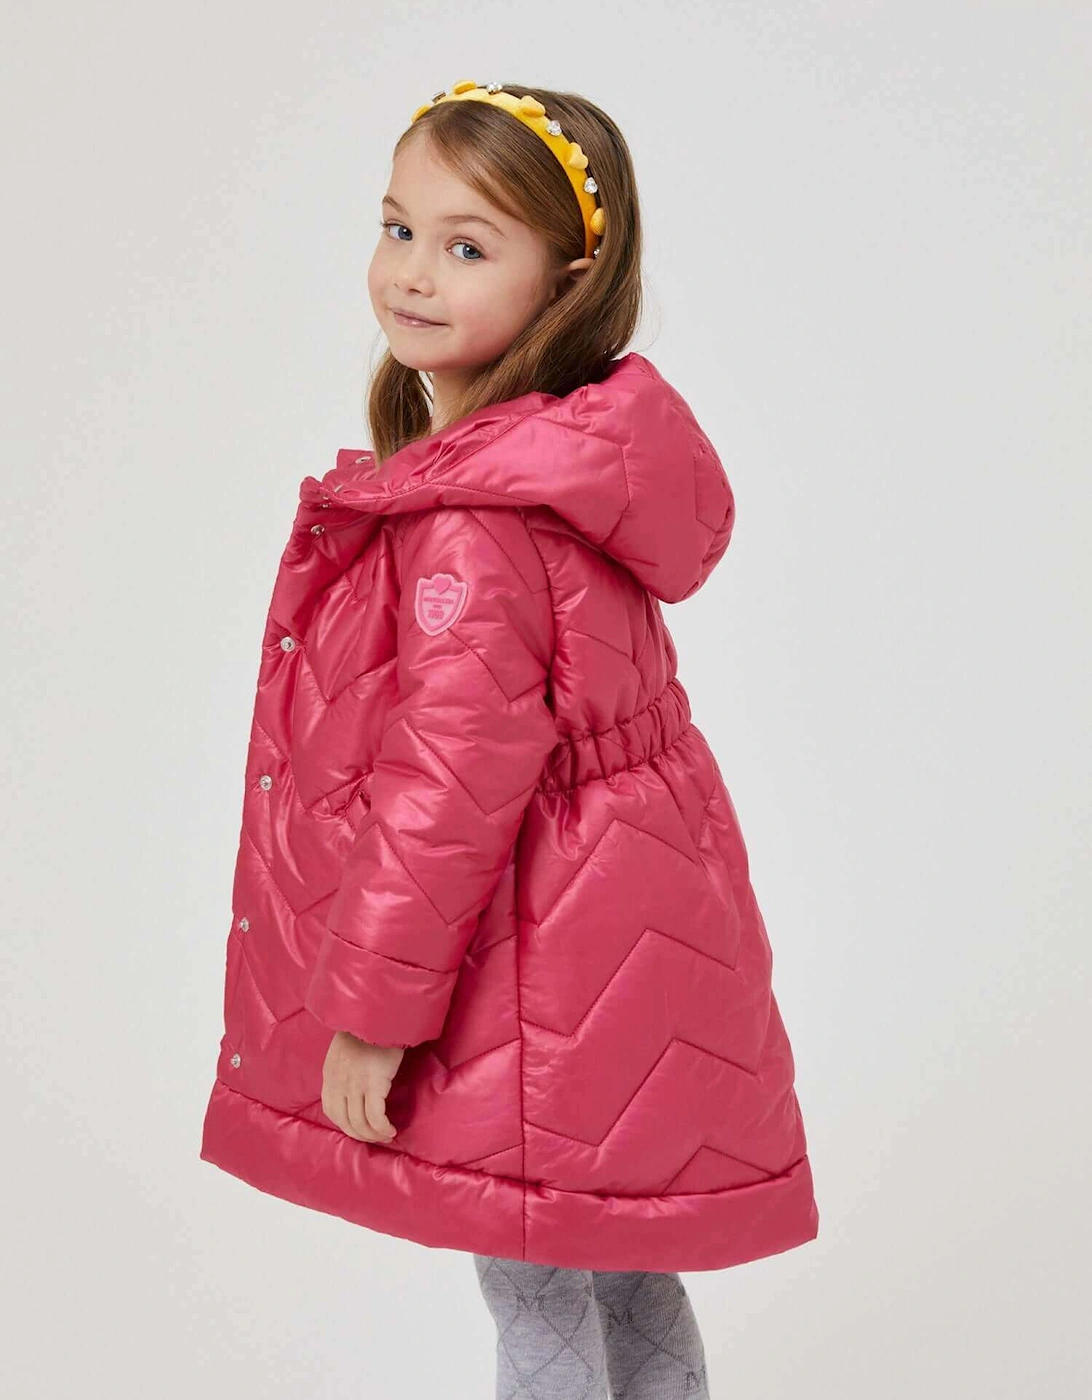 Girls Pink Quilted Jacket